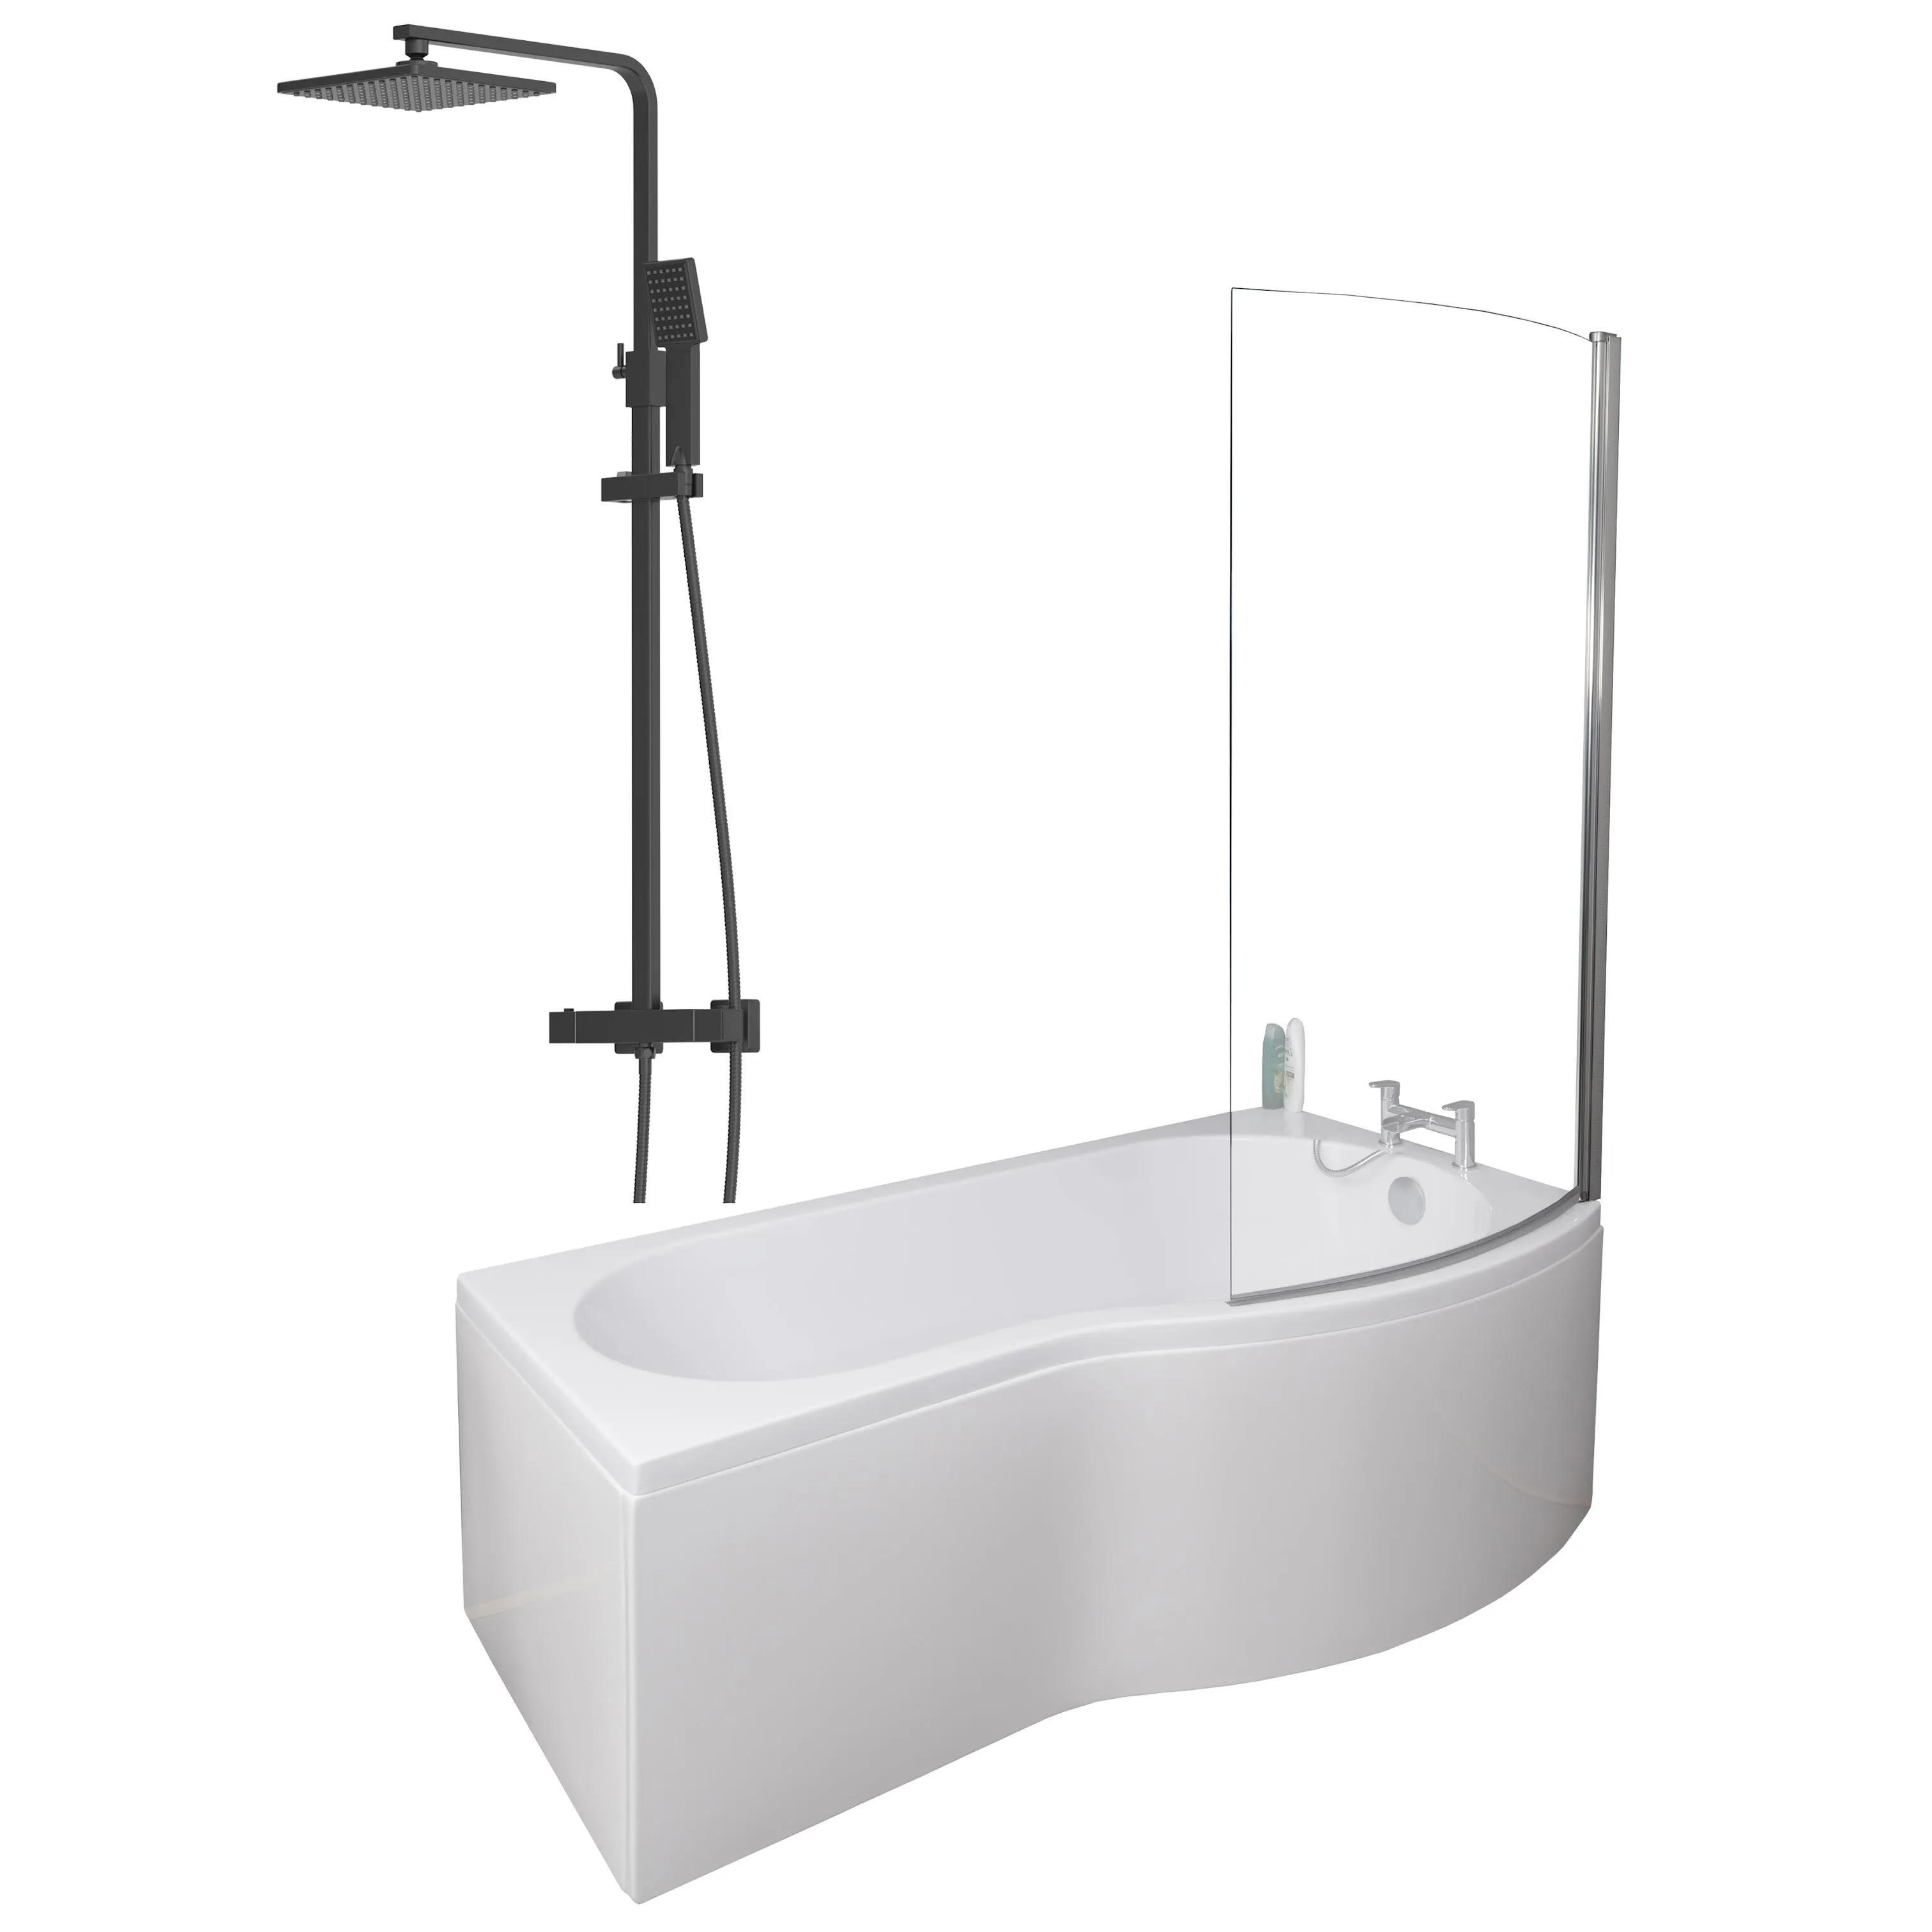 Ceramica P 1700 Right Shower Bath With Black Square Thermostatic Mixer Shower & Side Panel